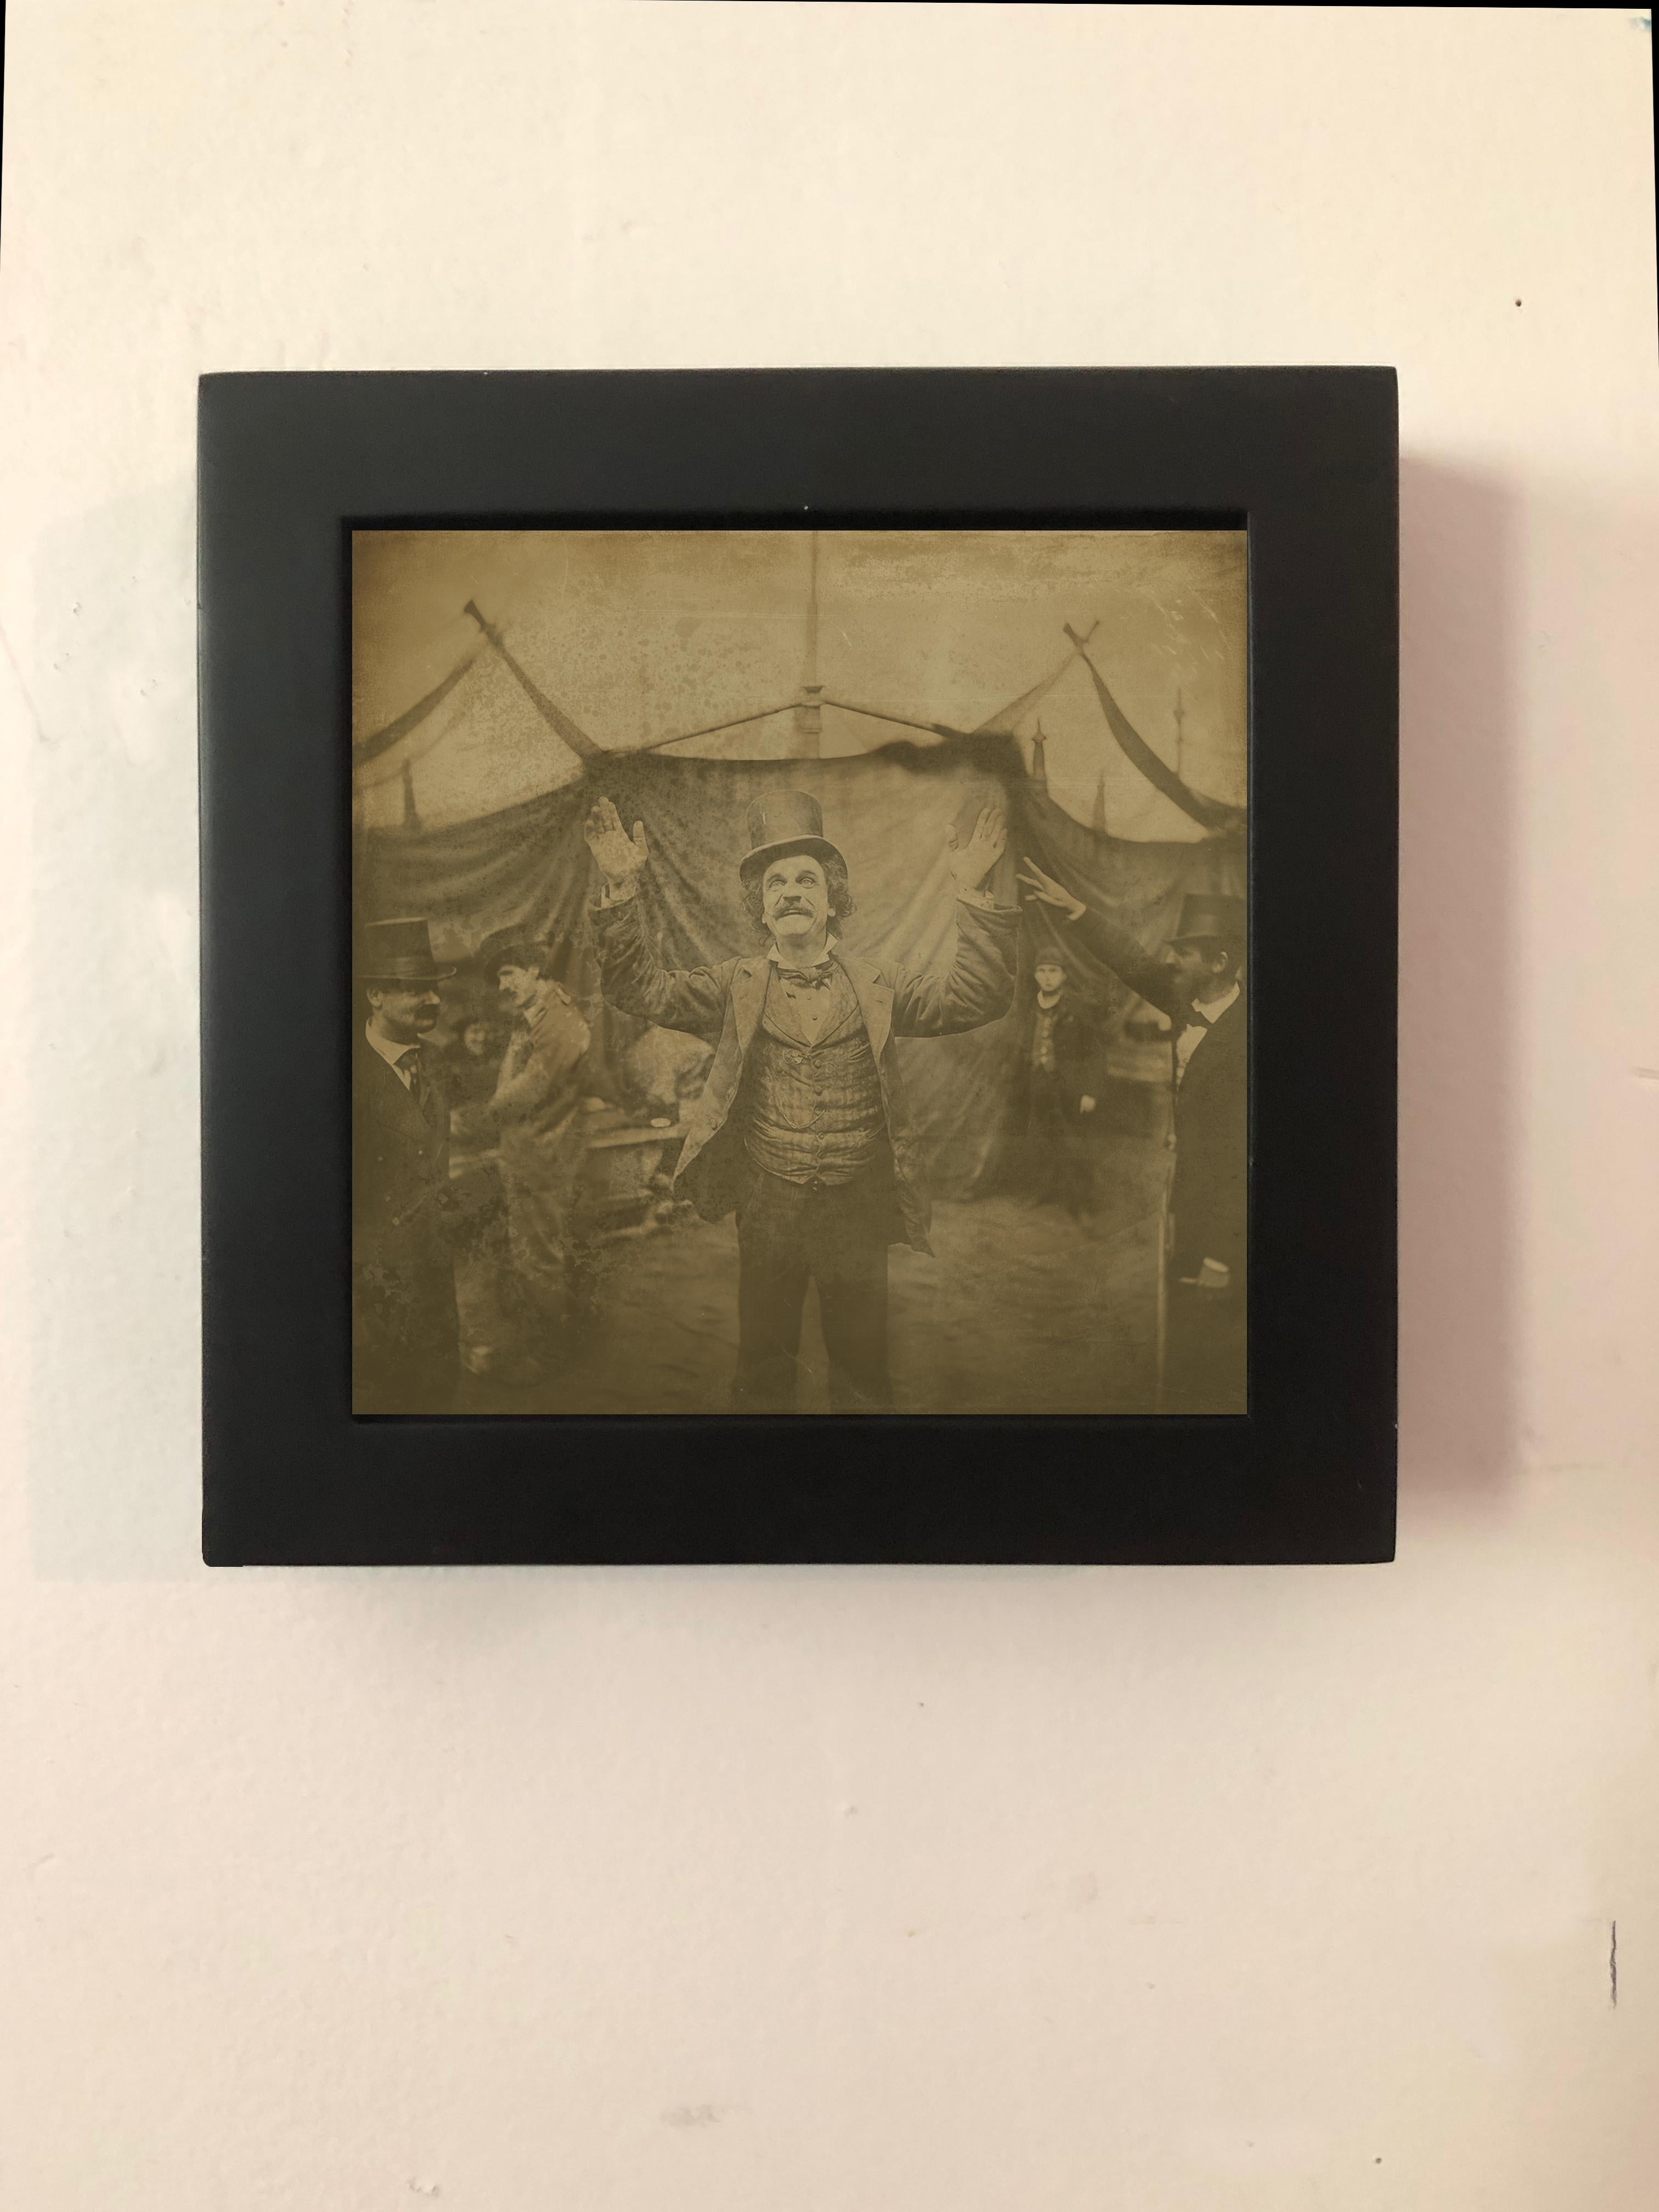 MASTER OF CEREMONIES   circus series    exotic daguerreotype reproduction  - Photograph by FPA Francis Pavy Artist